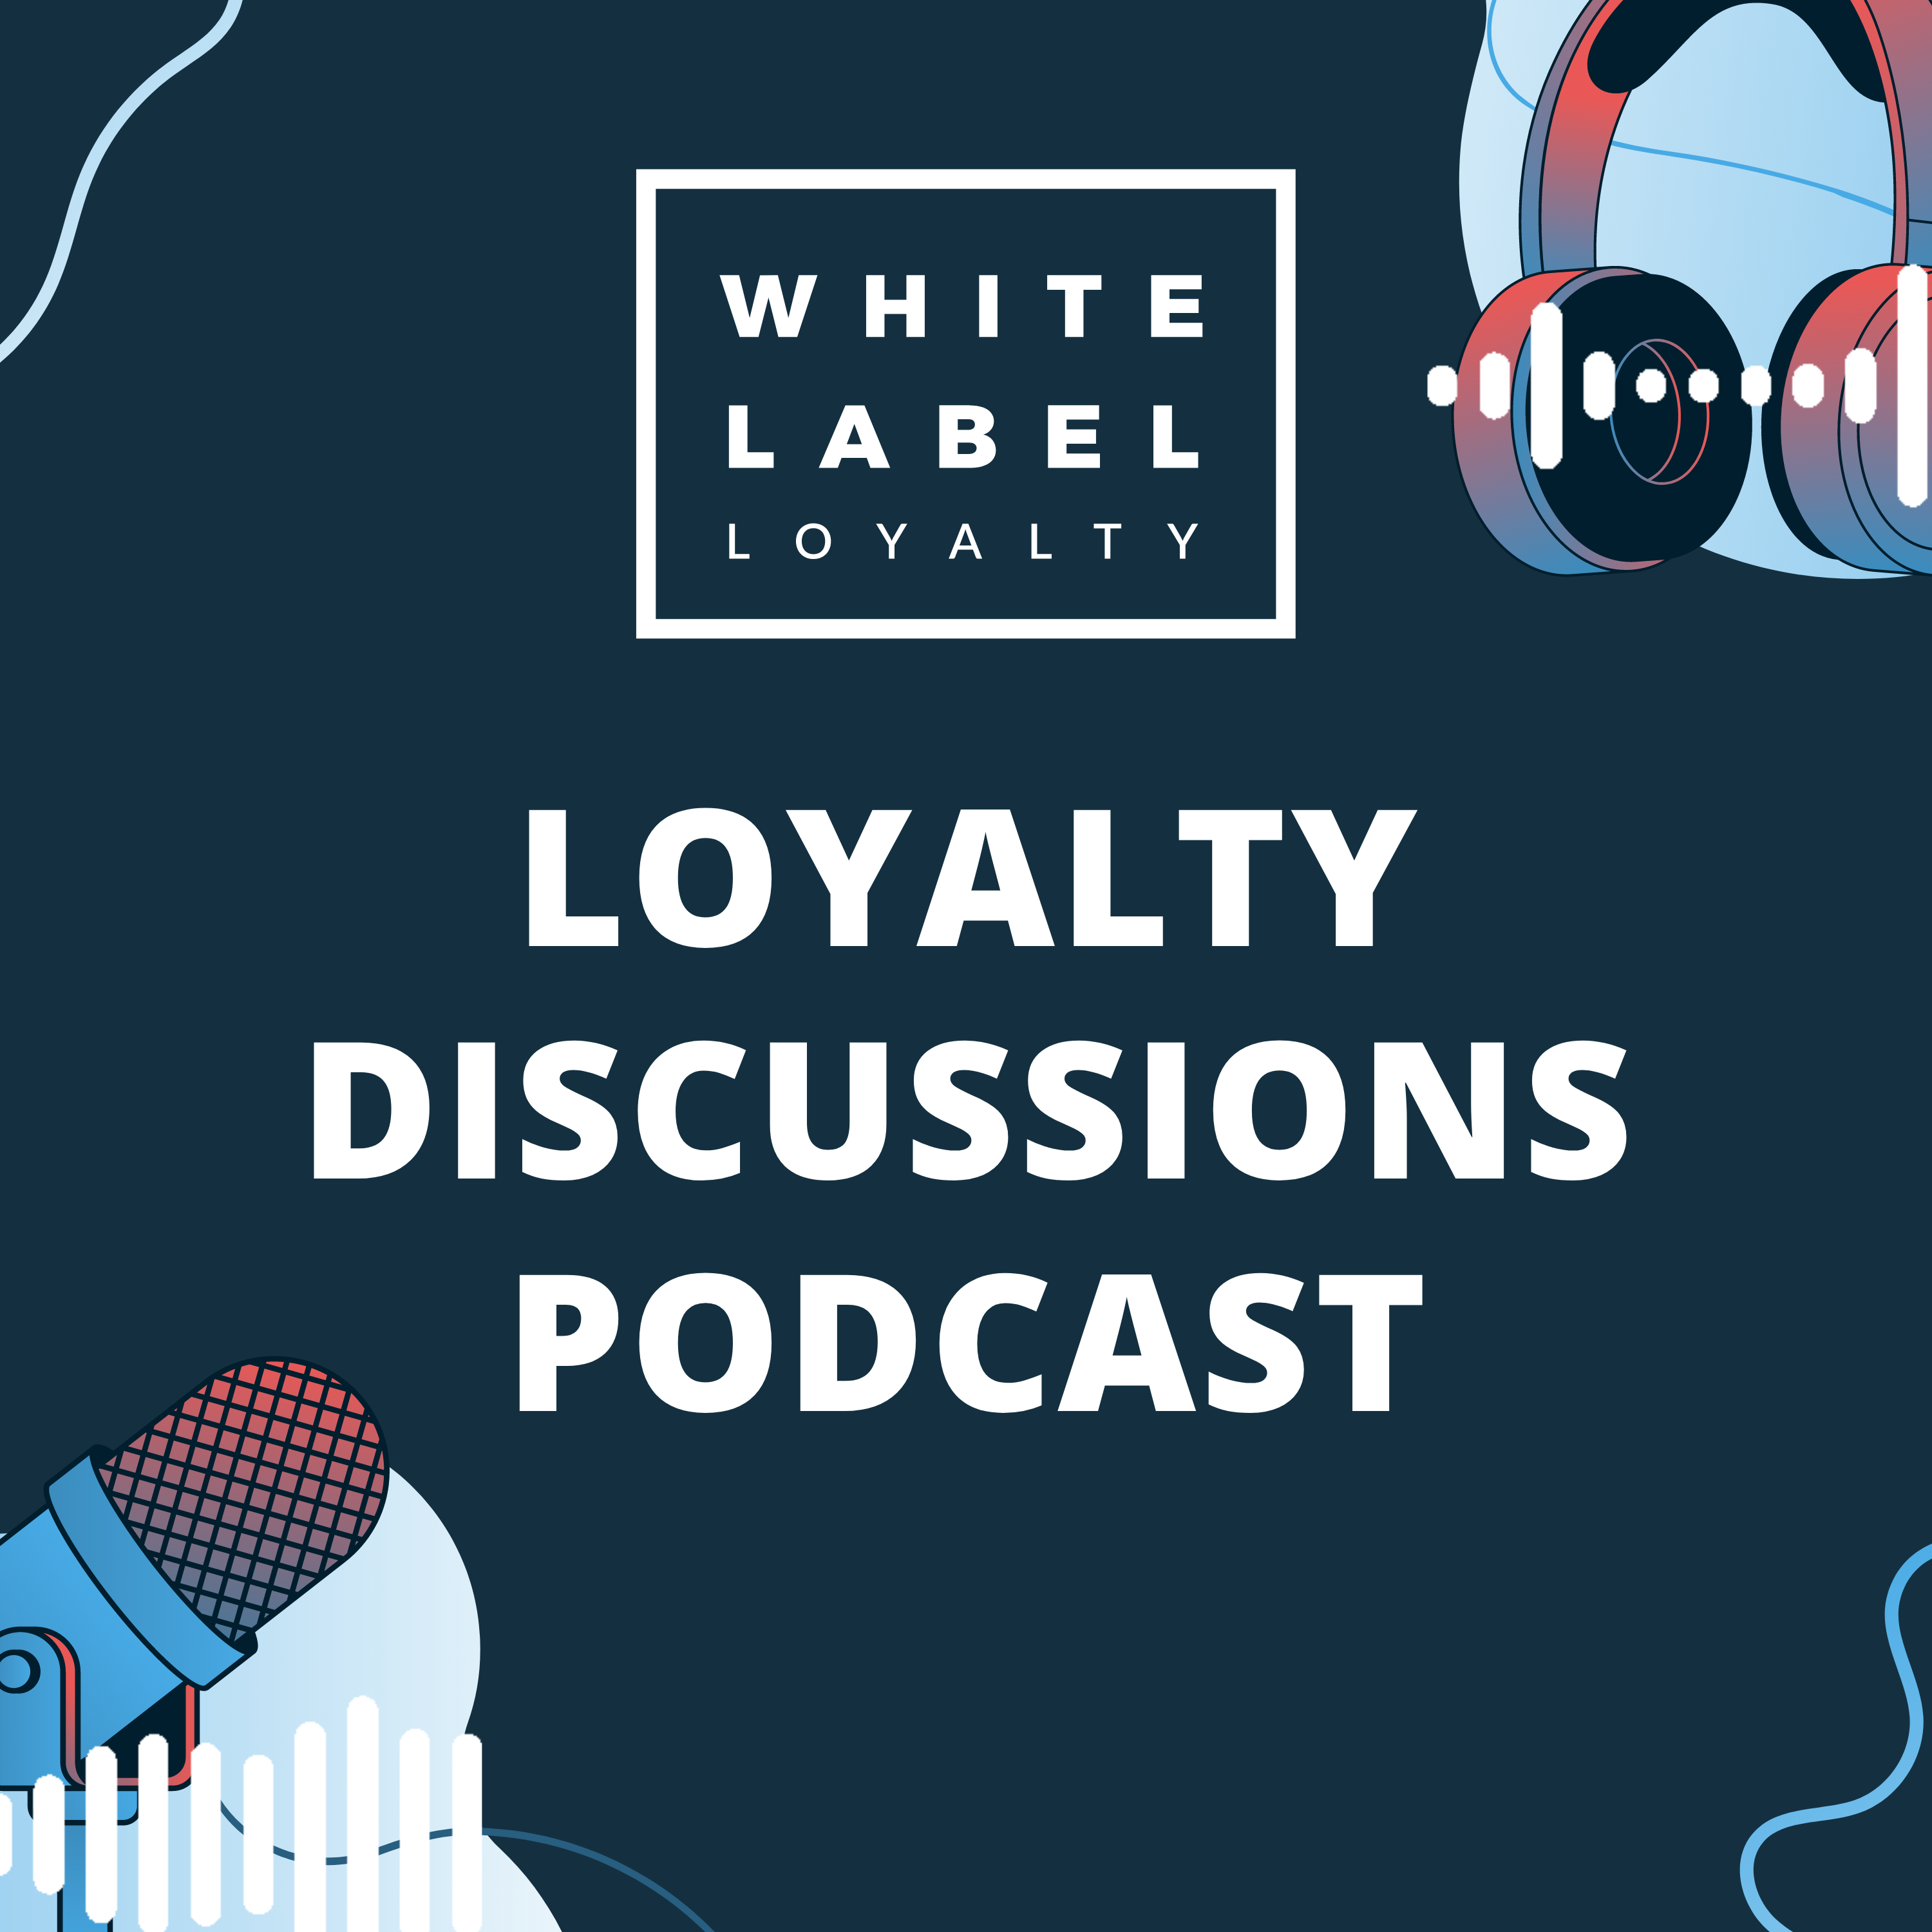 Profile artwork for Loyalty Discussions with White Label Loyalty